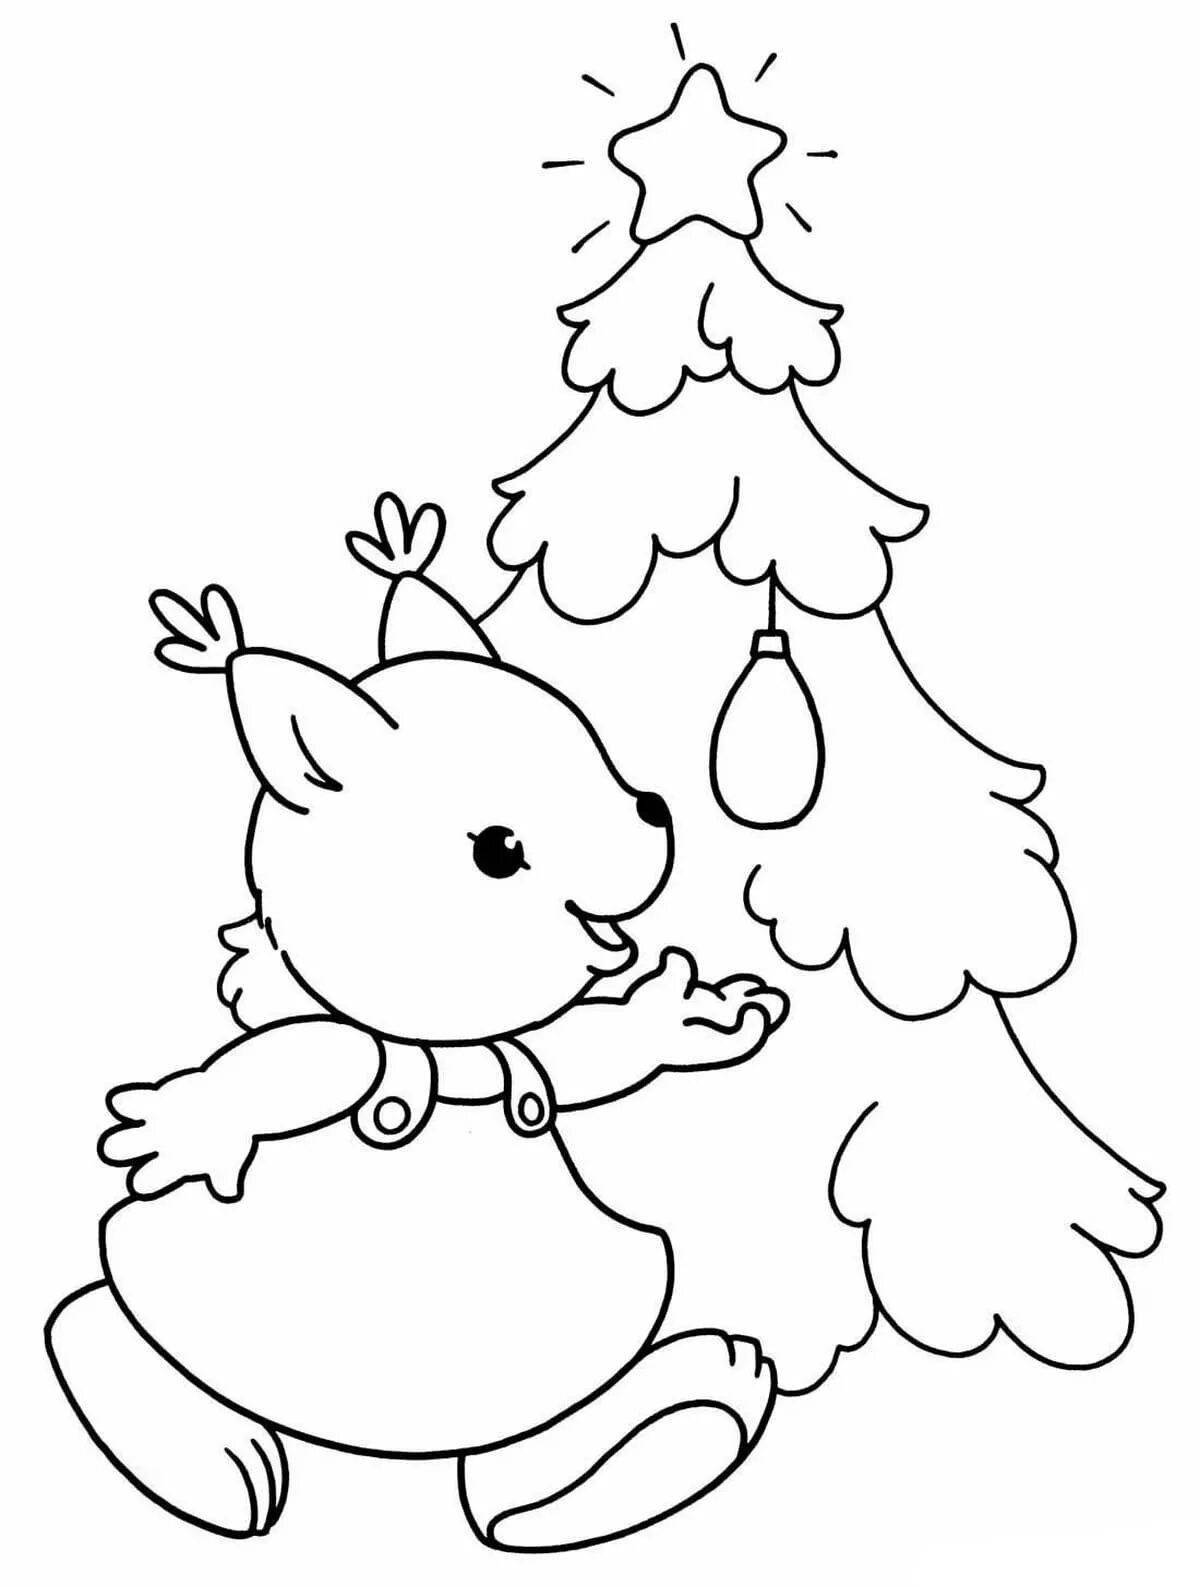 Wonderful Christmas coloring book for kids